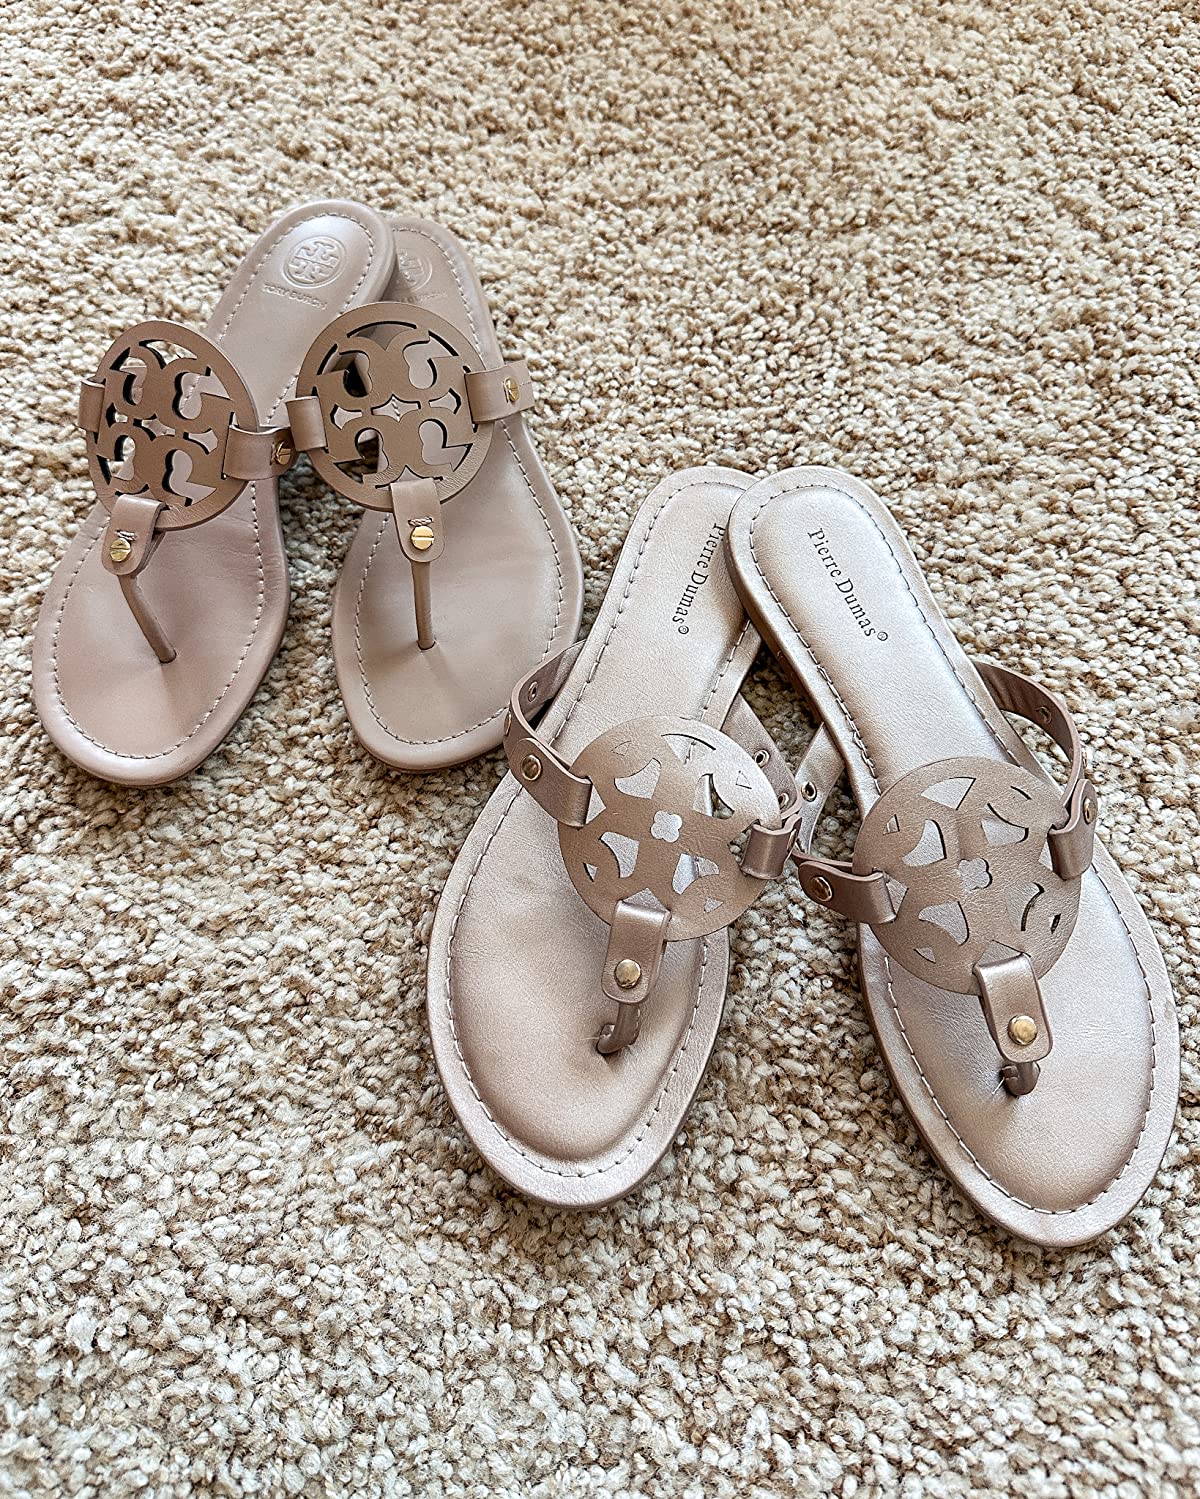 tory burch sandals, look alike sandals, beachwear, vacation style, travel outfit essentials, accessories, 